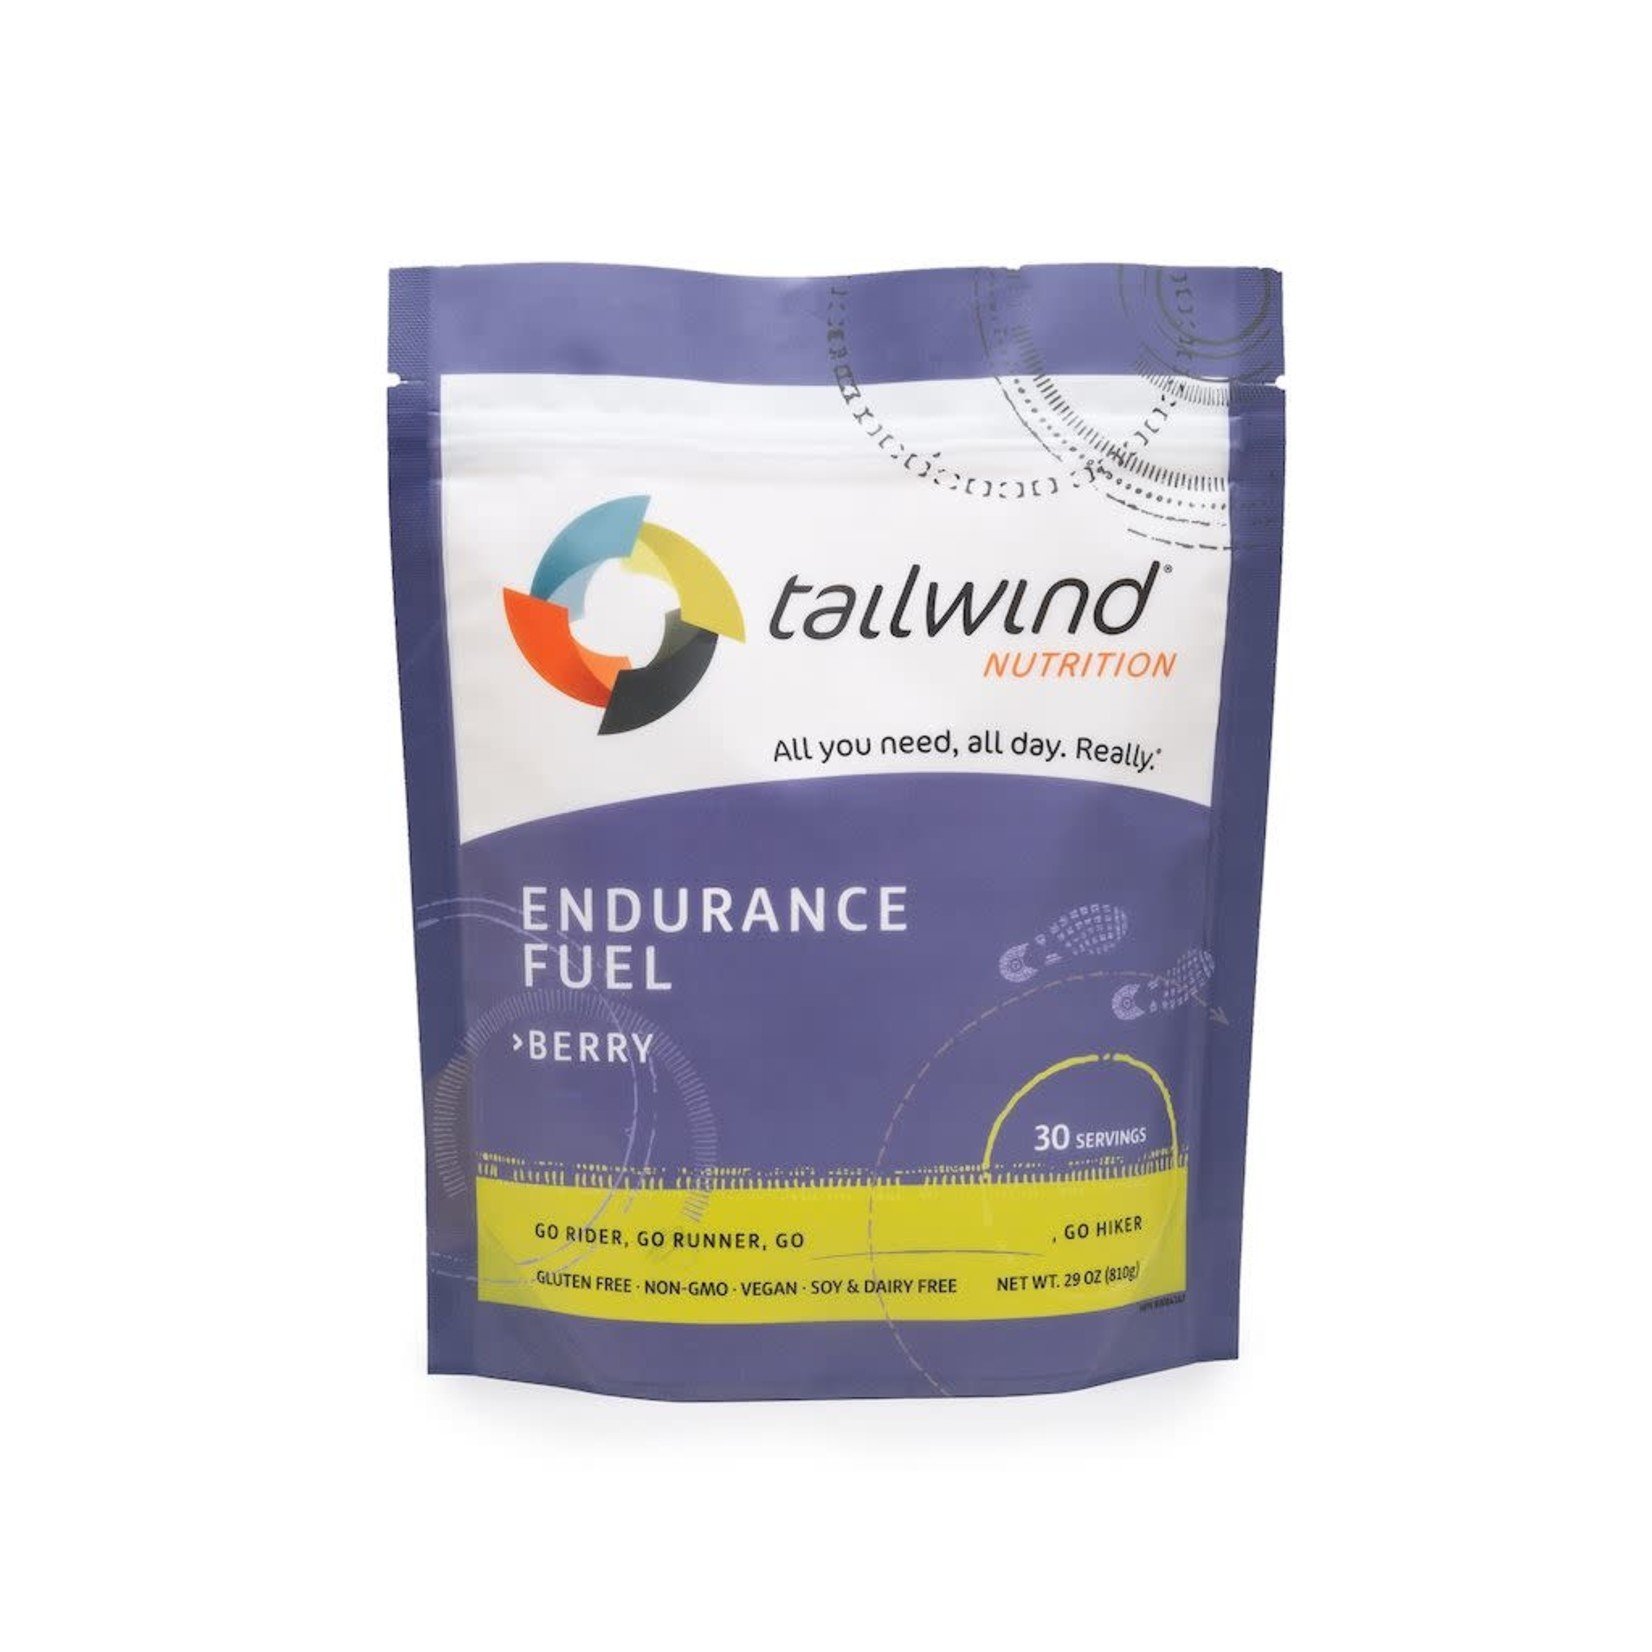 Tailwind Nutrition Endurance Fuel Tailwind Berry (30 servings)